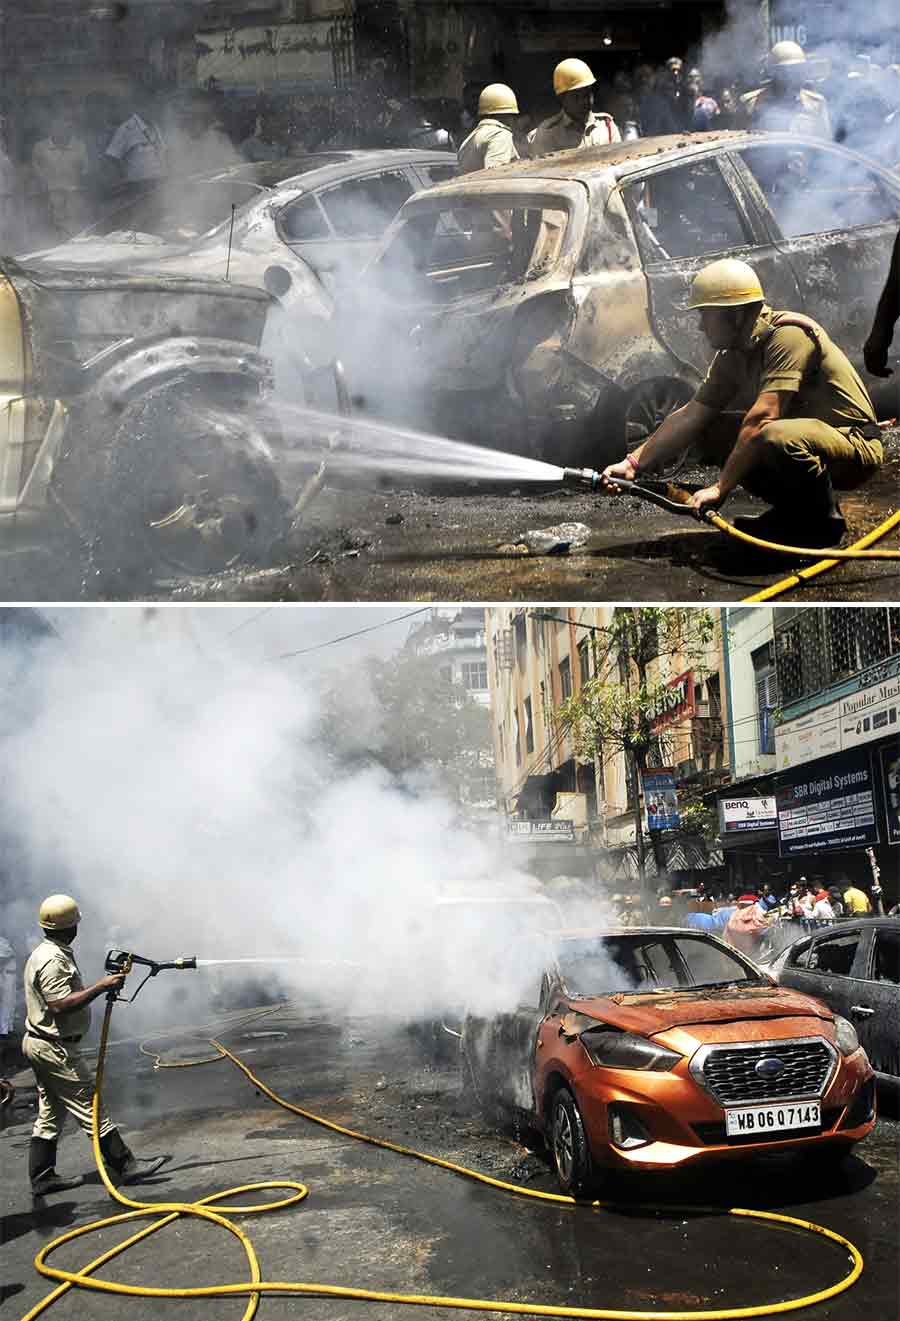 Three cars caught fire at Chandni Chowk on Thursday afternoon. Four fire-tenders were pressed into service to douse the flames. No casualties were reported